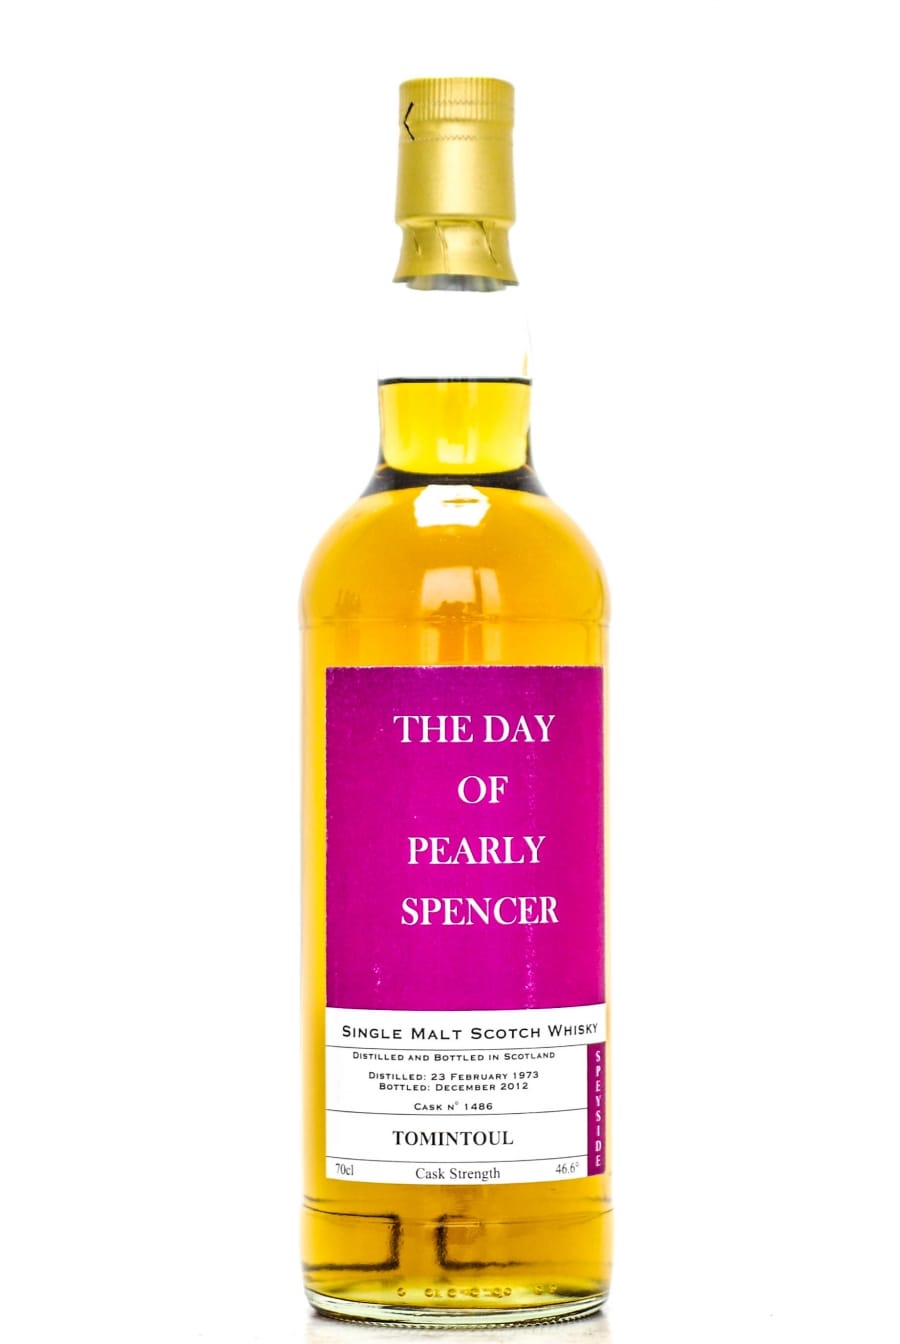 Tomintoul - Tomintoul 39 Years Old Taste Still  Bottlers: The Day of Pearly Spencer Cask:1486 46.6% 1973 NO OC INCLUDED!